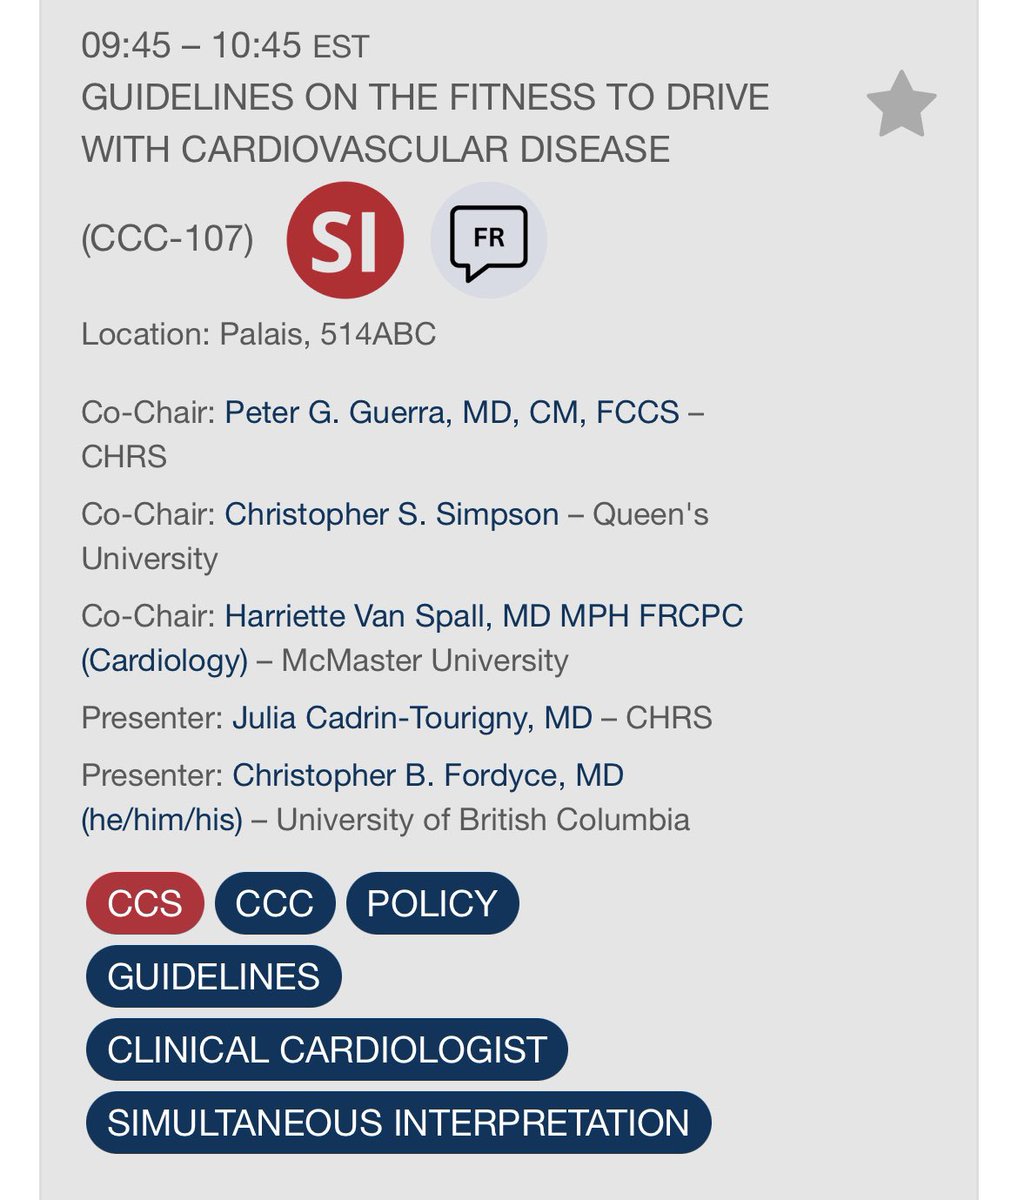 Please join us at #Vascular2023 in Montreal 9:45 AM EST Thurs Oct 26 As we unveil the 2023 @SCC_CCS #FitnesstoDrive #Guidelines Recommendations for 🚗🚐 w #cardiovascular diagnoses & interventions harmonized w #MinistryOfTransport 🇨🇦 📄 onlinecjc.ca/article/S0828-… (Pre-proofs)